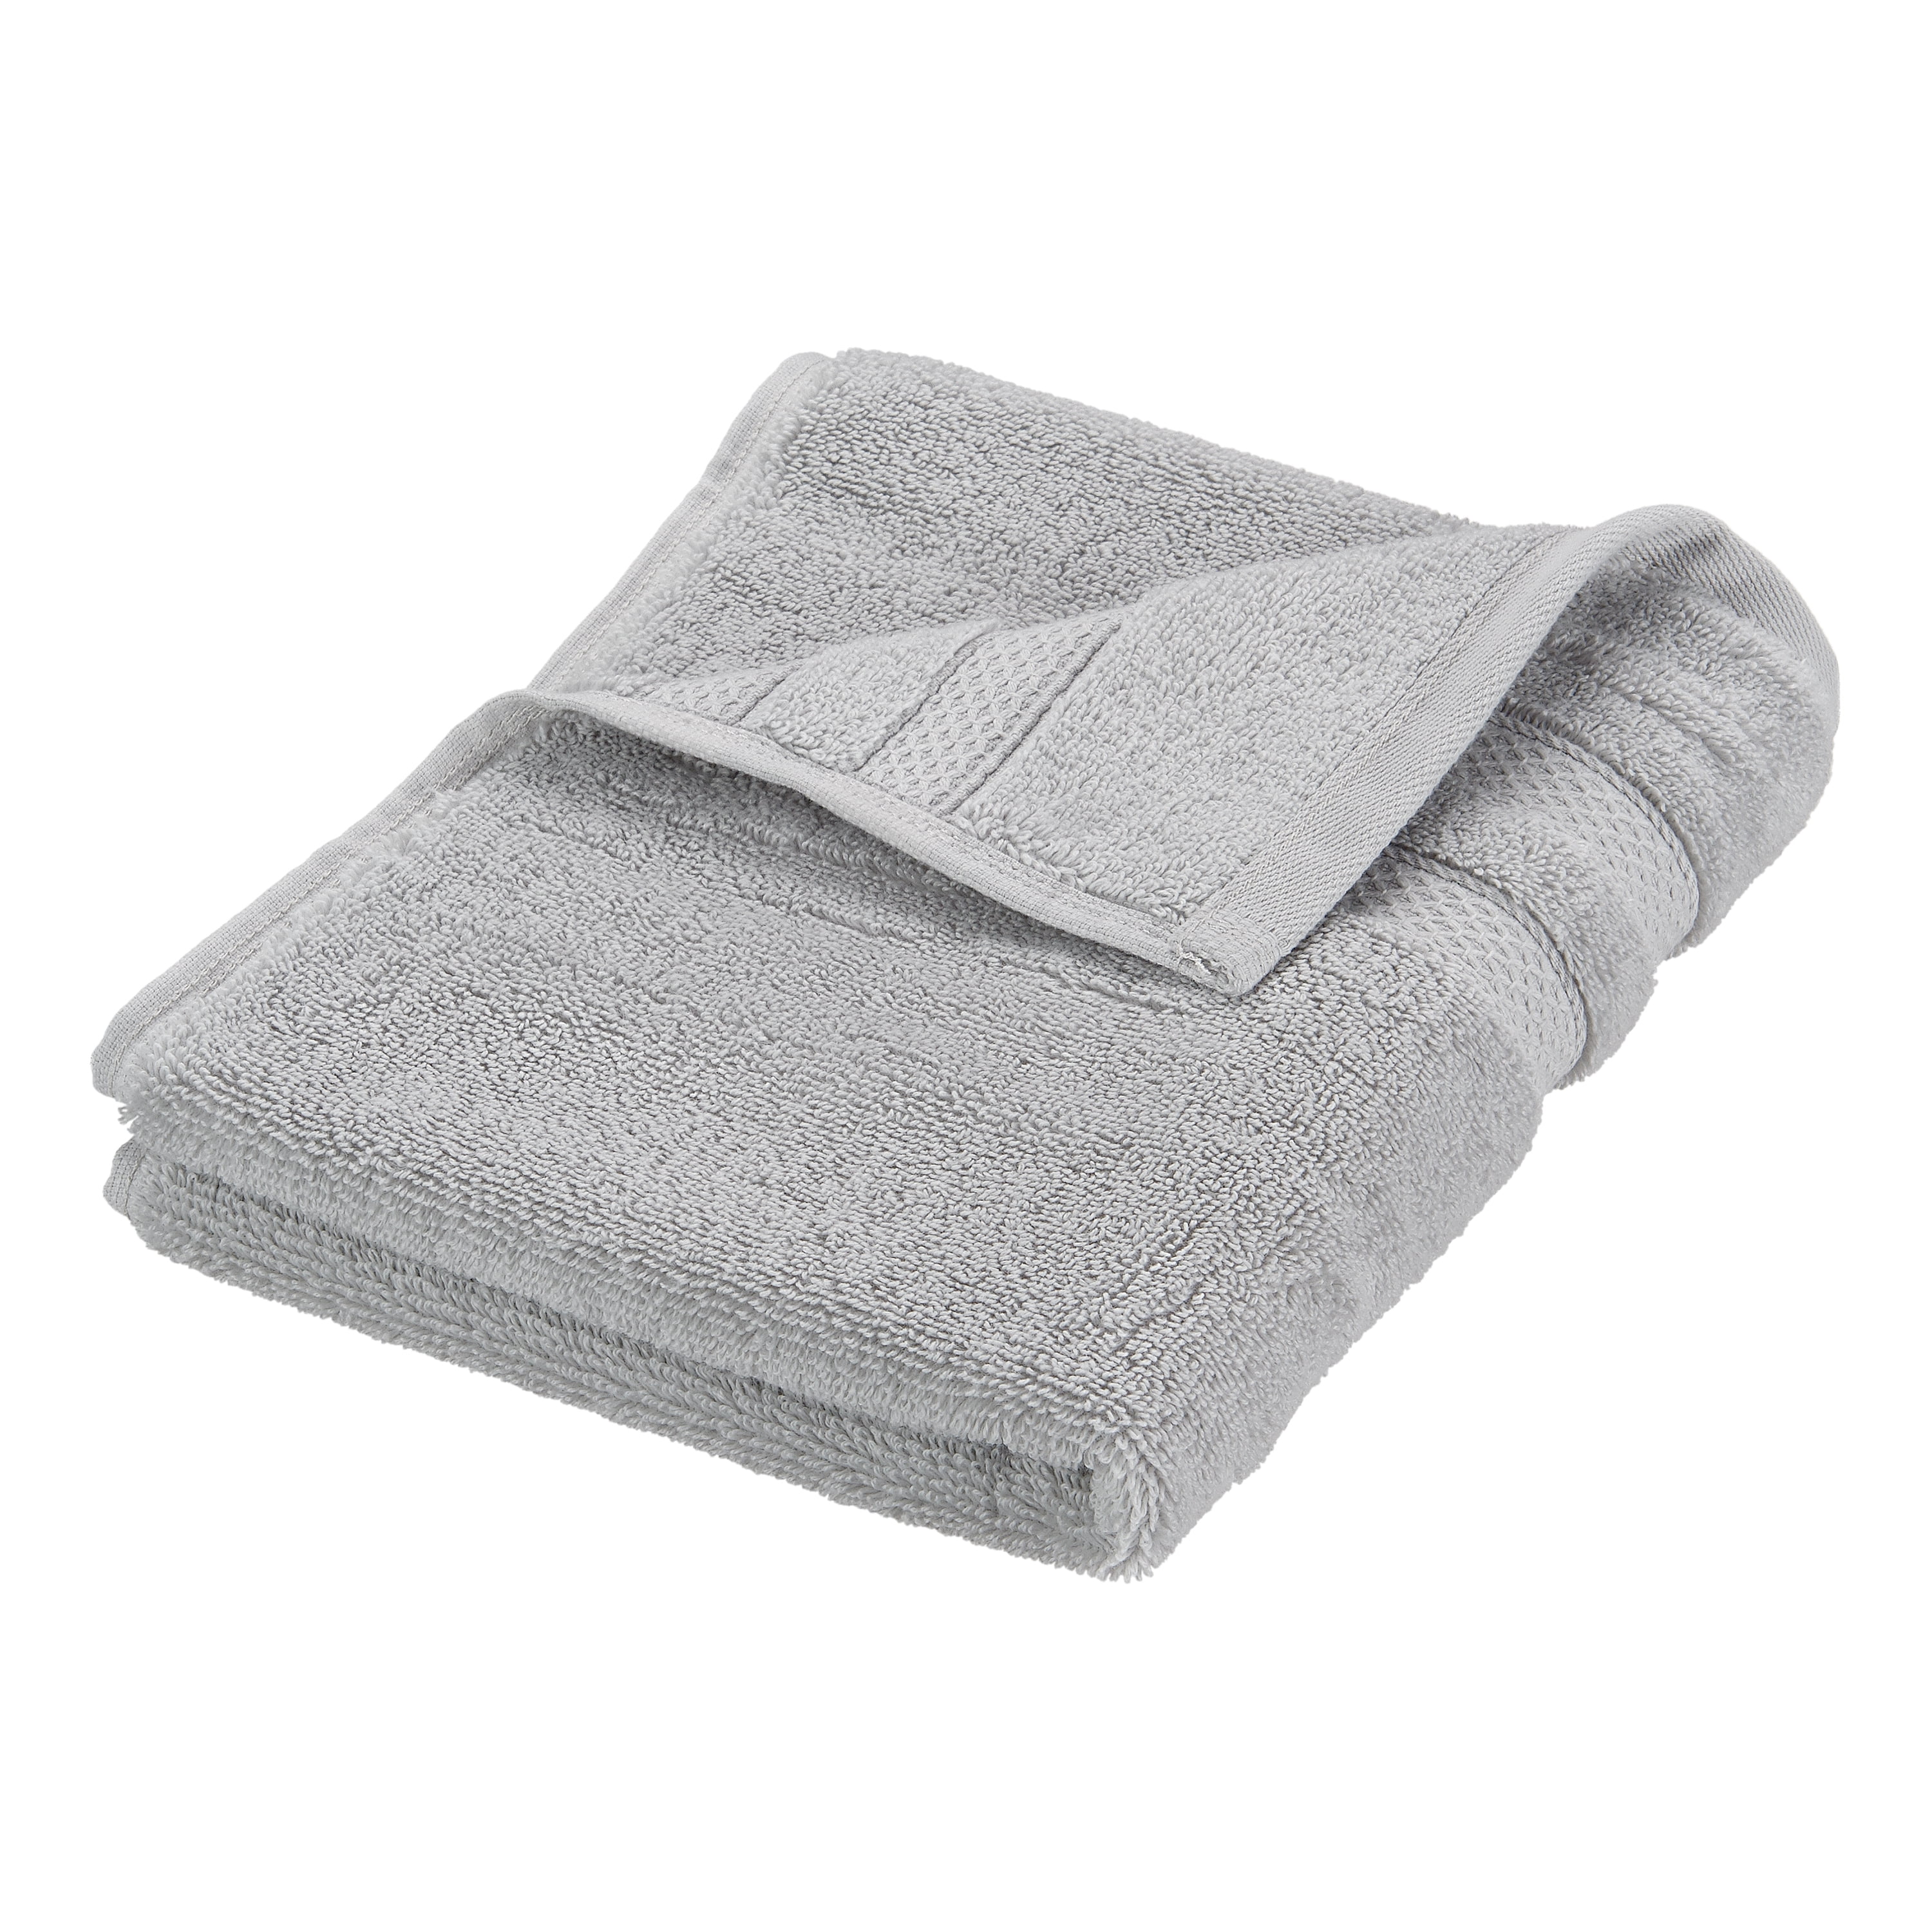 Hotel Style Turkish Cotton Bath Towel Collection Solid Print Silver Hand Towel